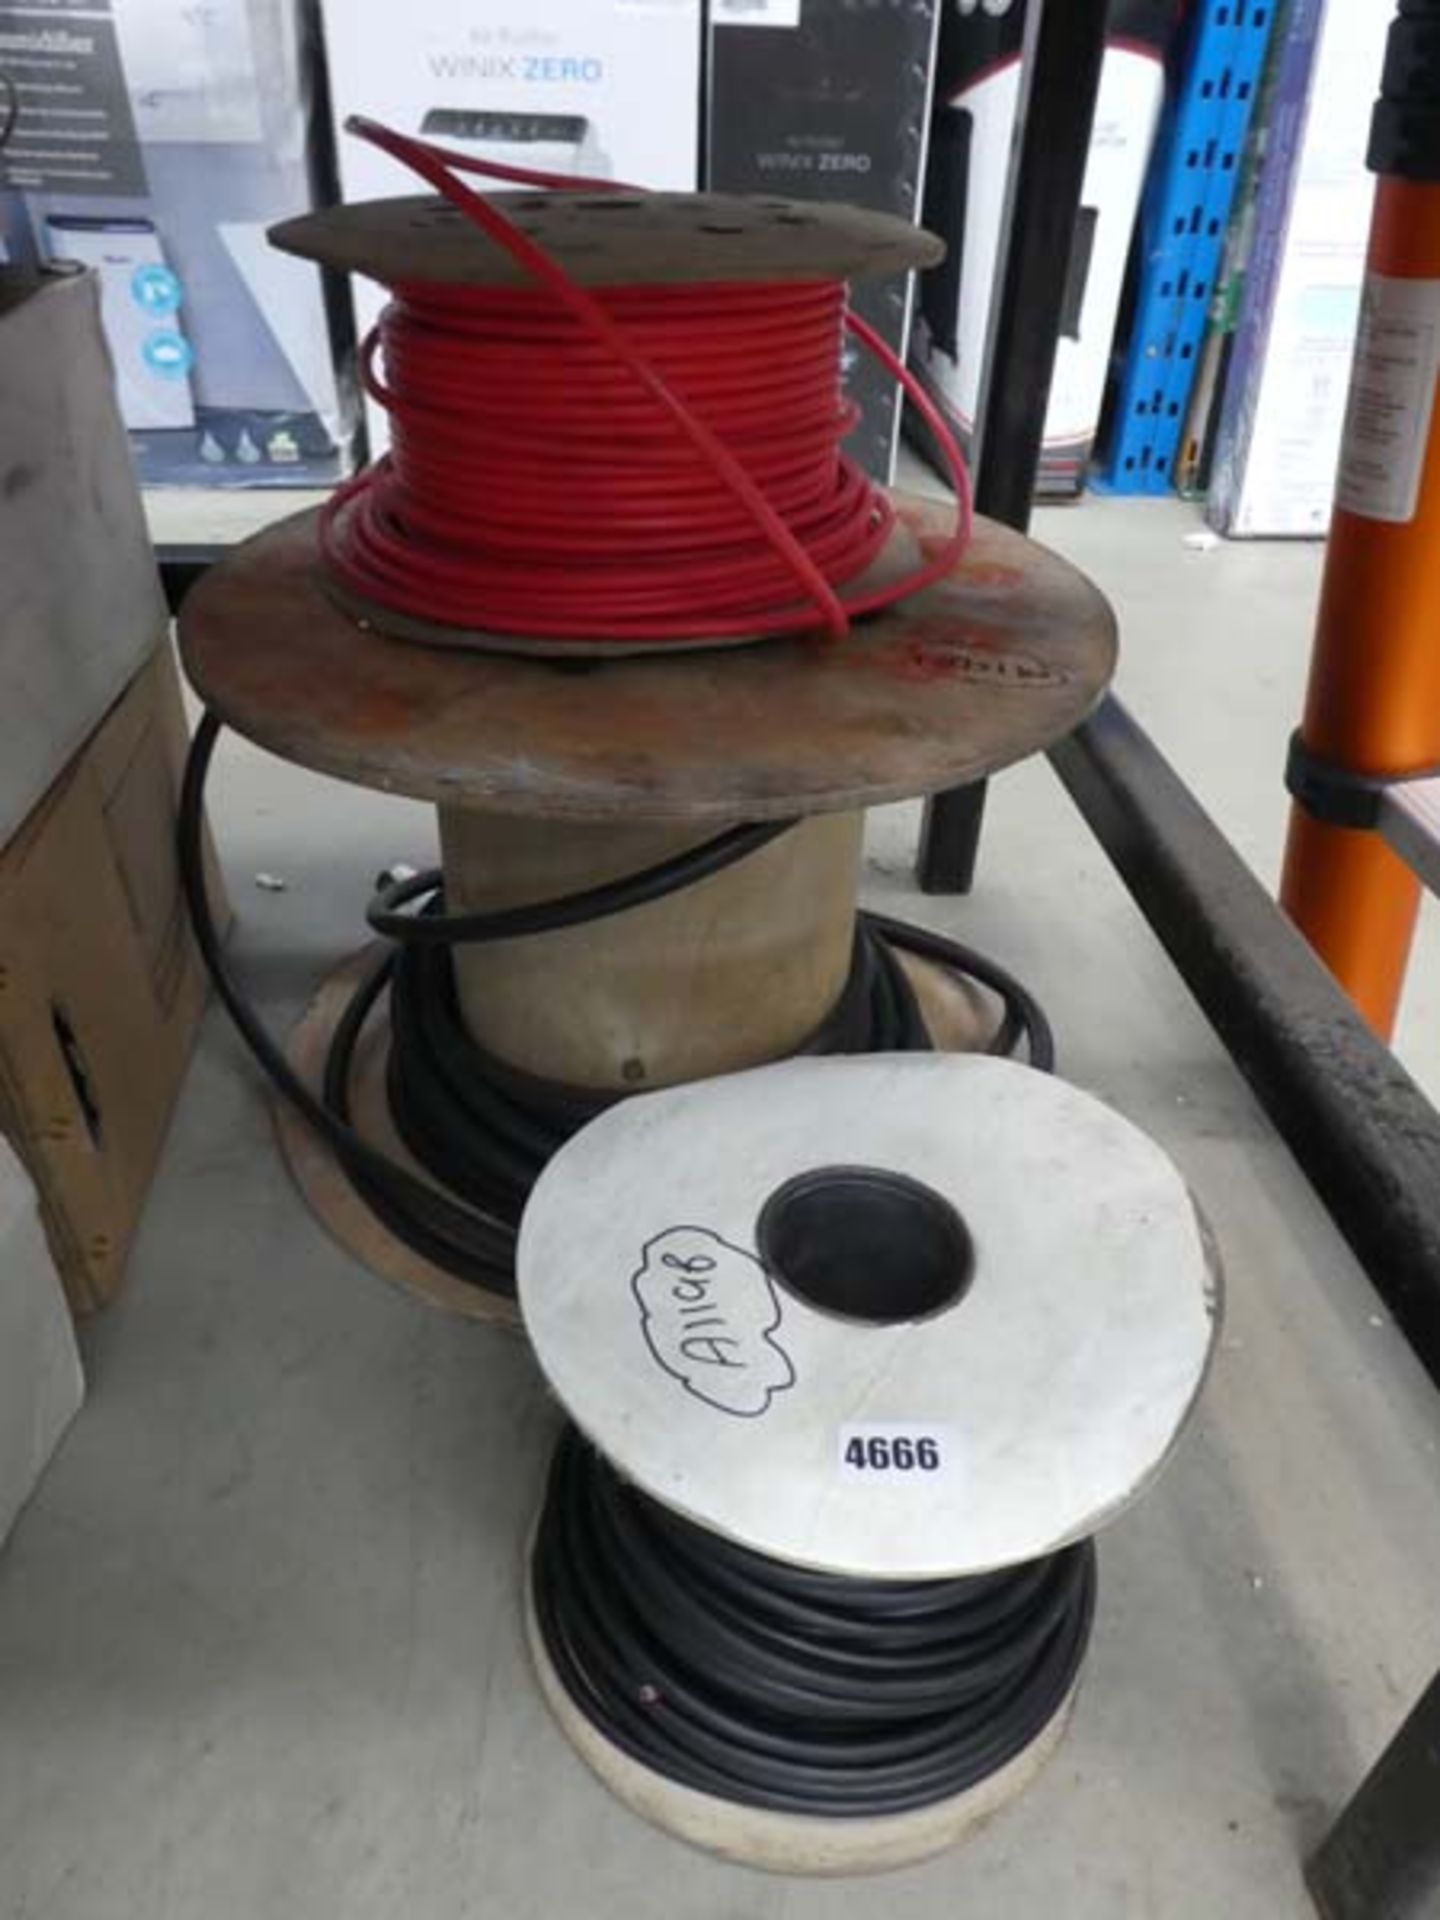 2 rolls of heavy duty cable